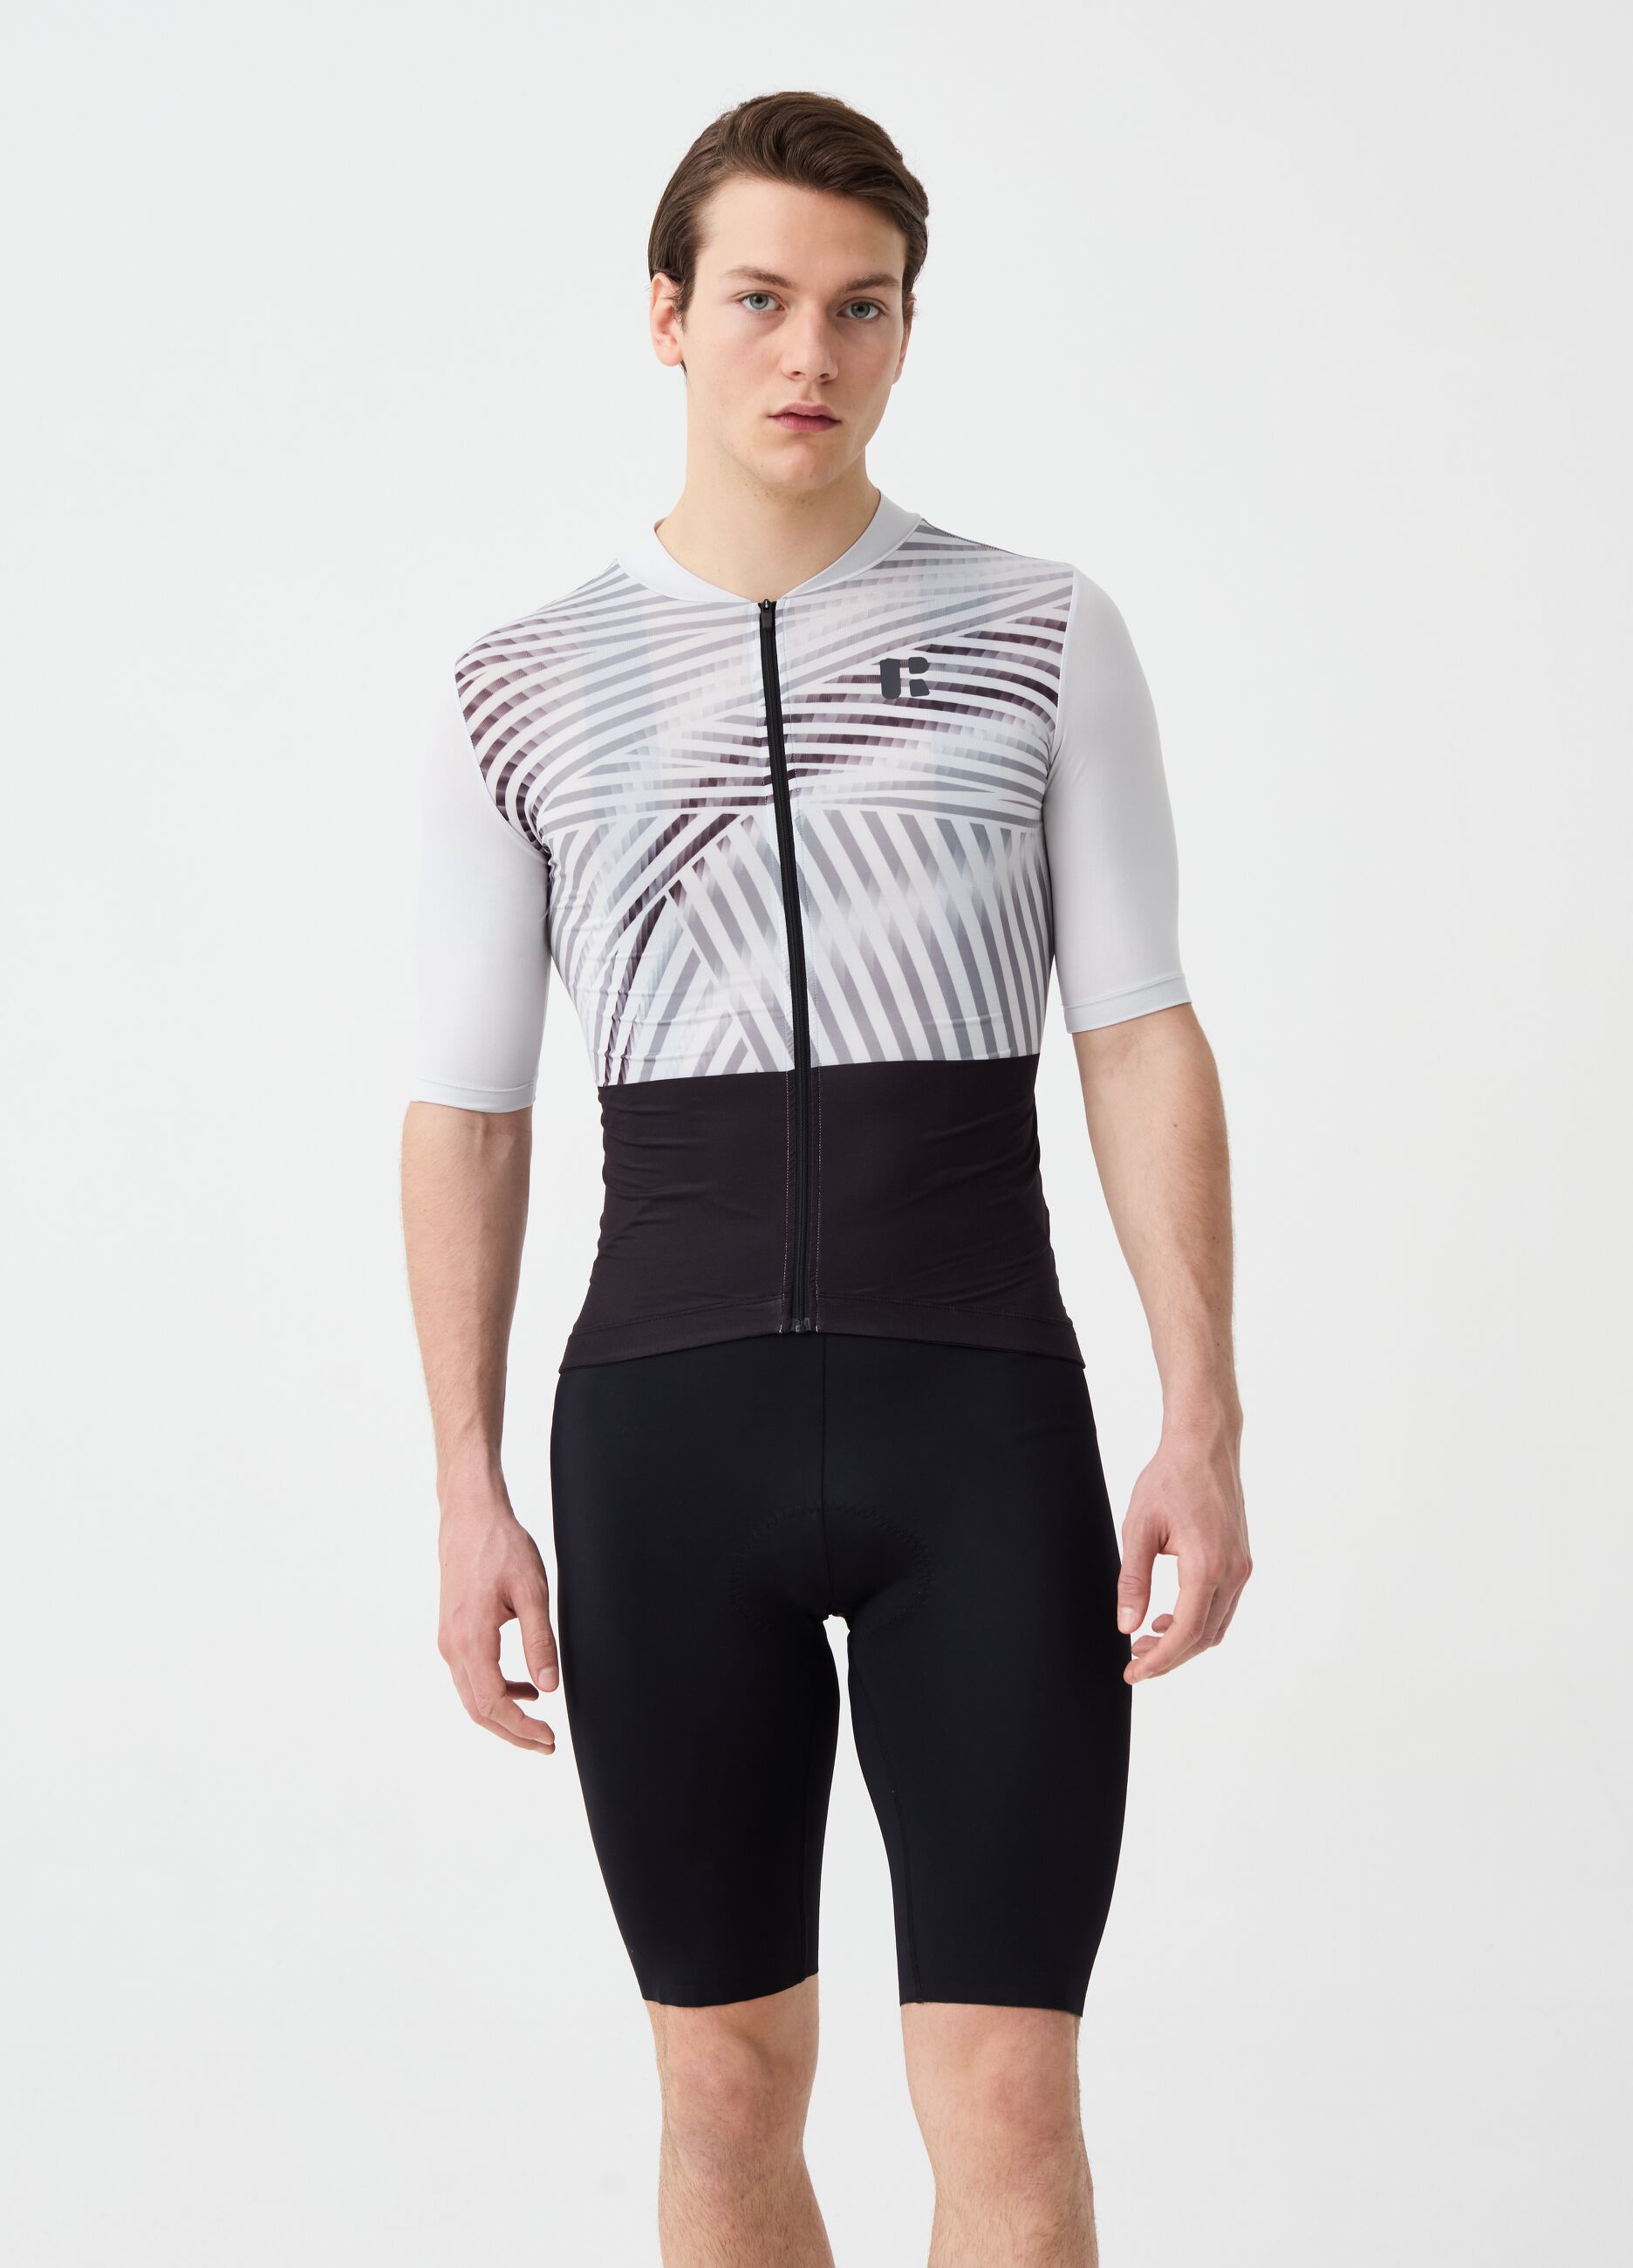 Urban Riders full-zip cycle T-shirt with print